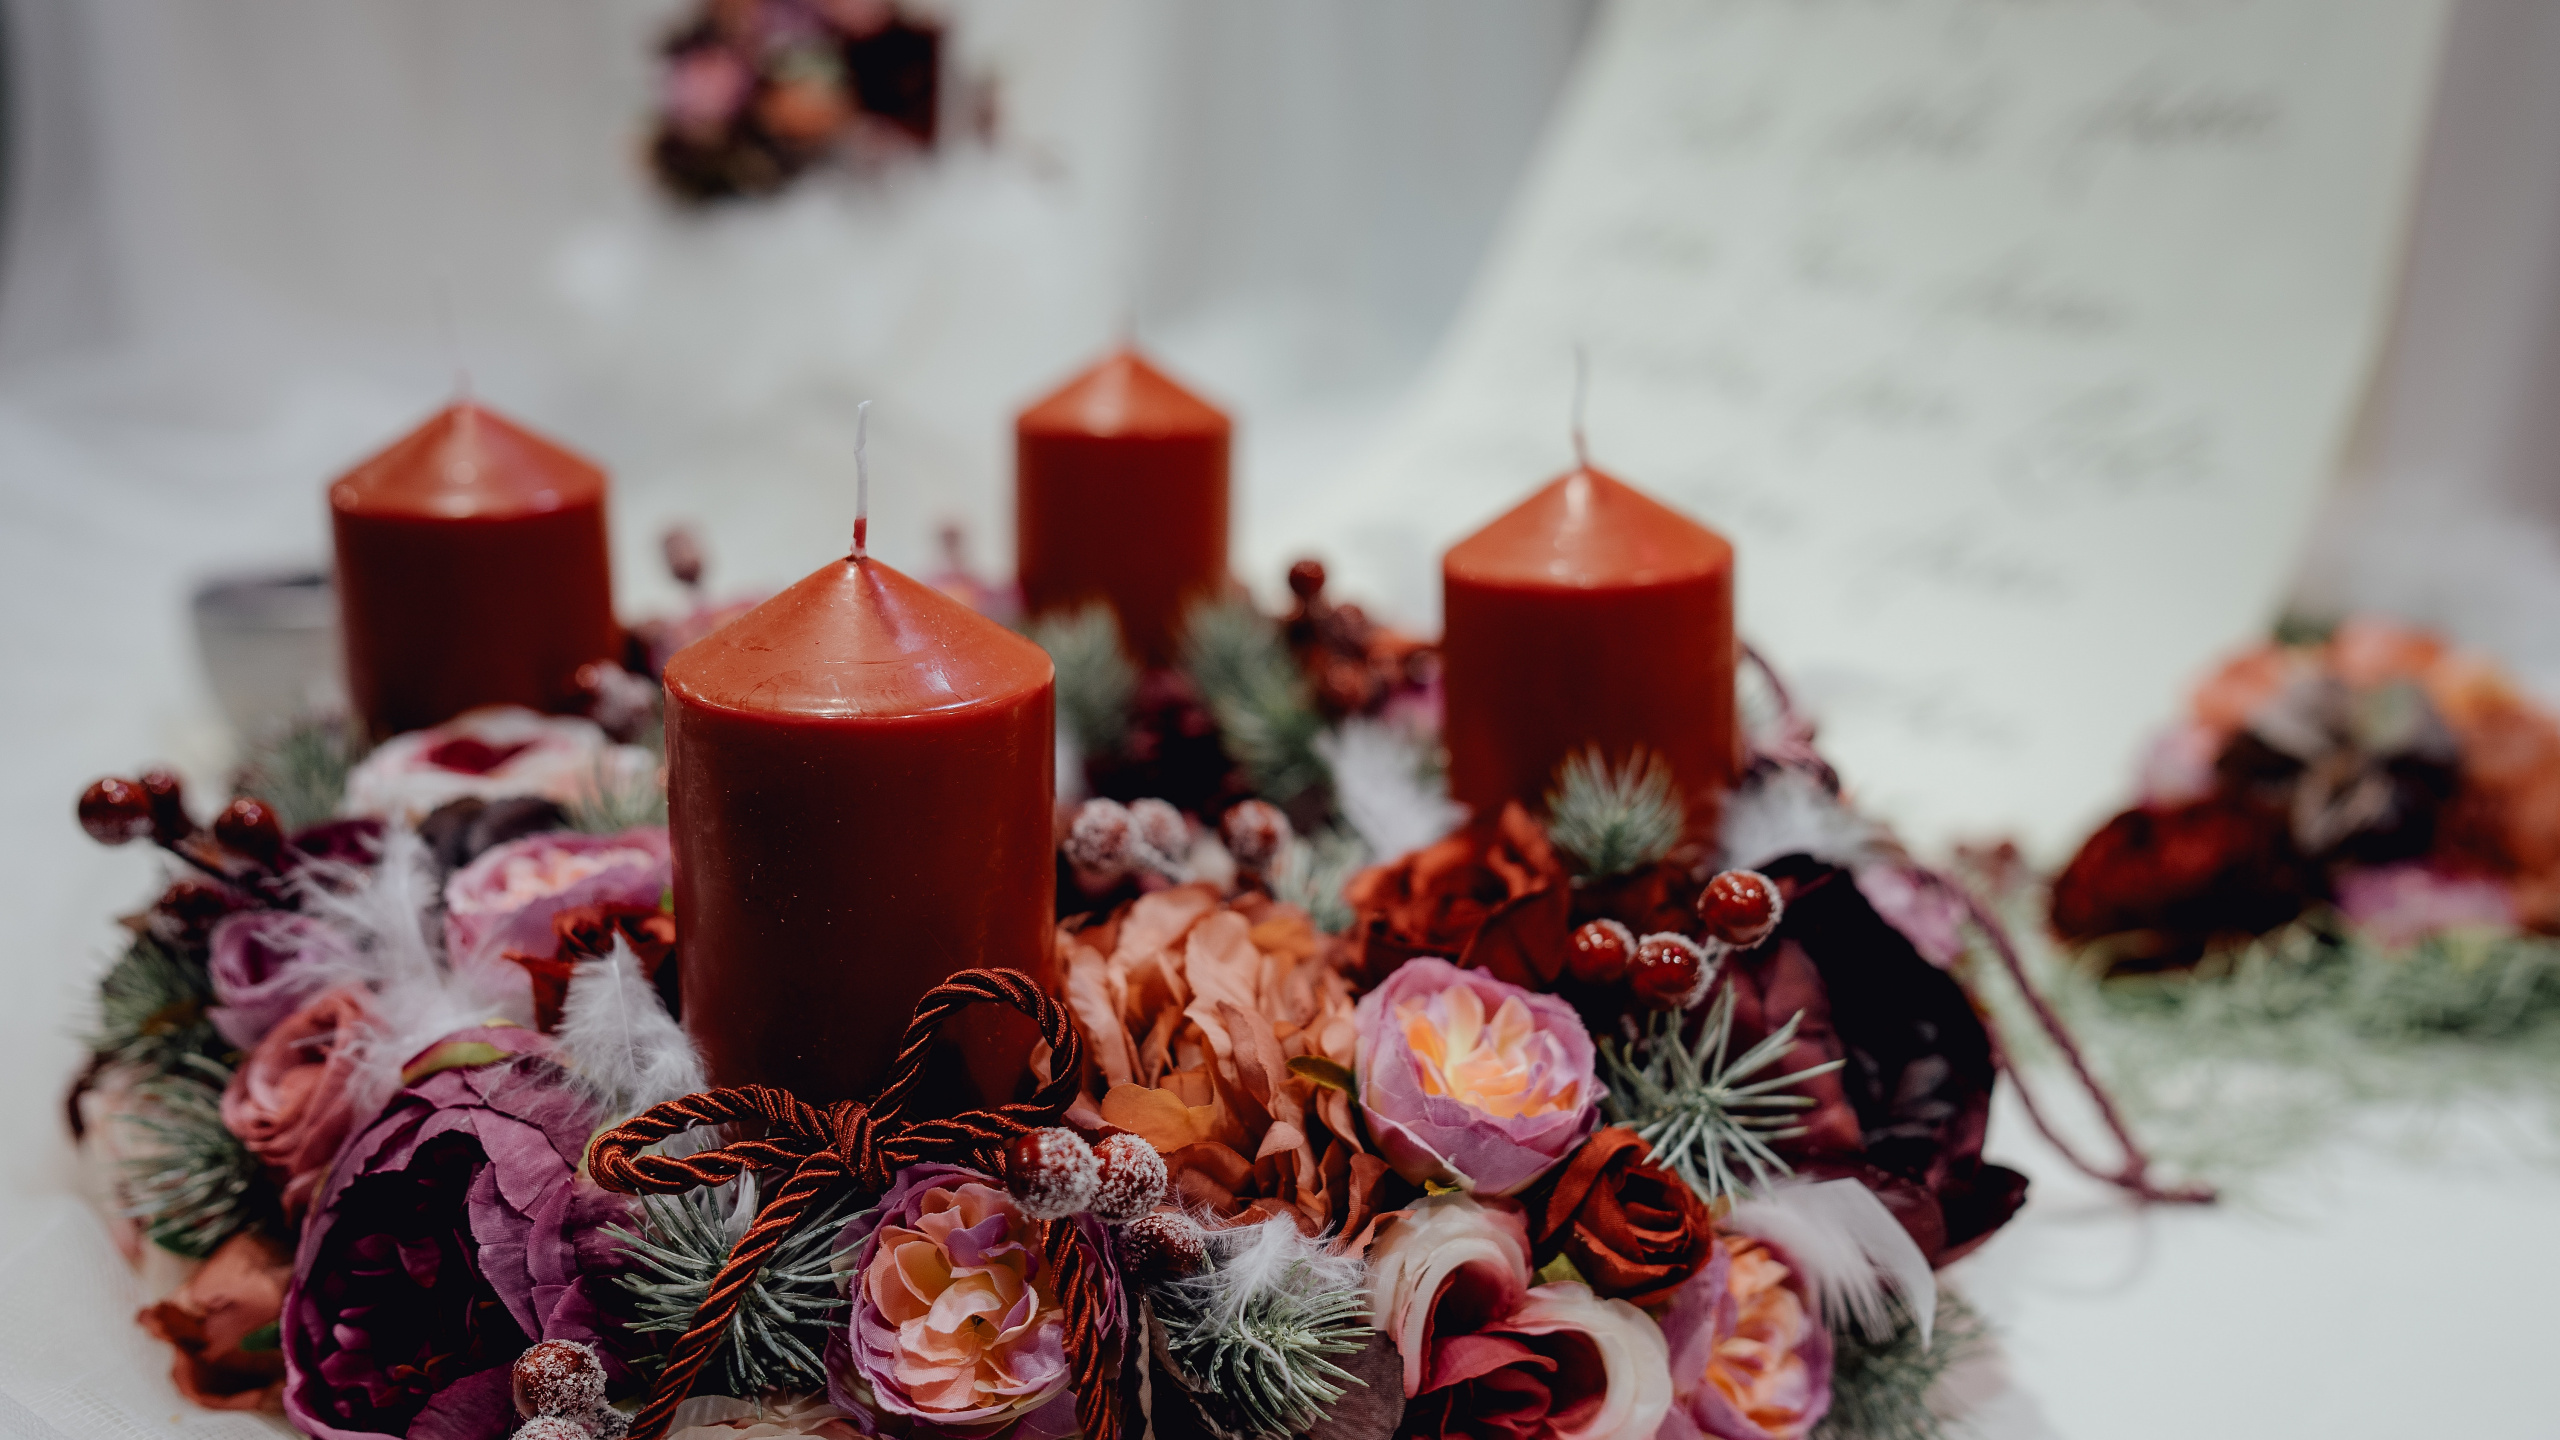 Candle, Lighting, Centrepiece, Floristry, Floral Design. Wallpaper in 2560x1440 Resolution